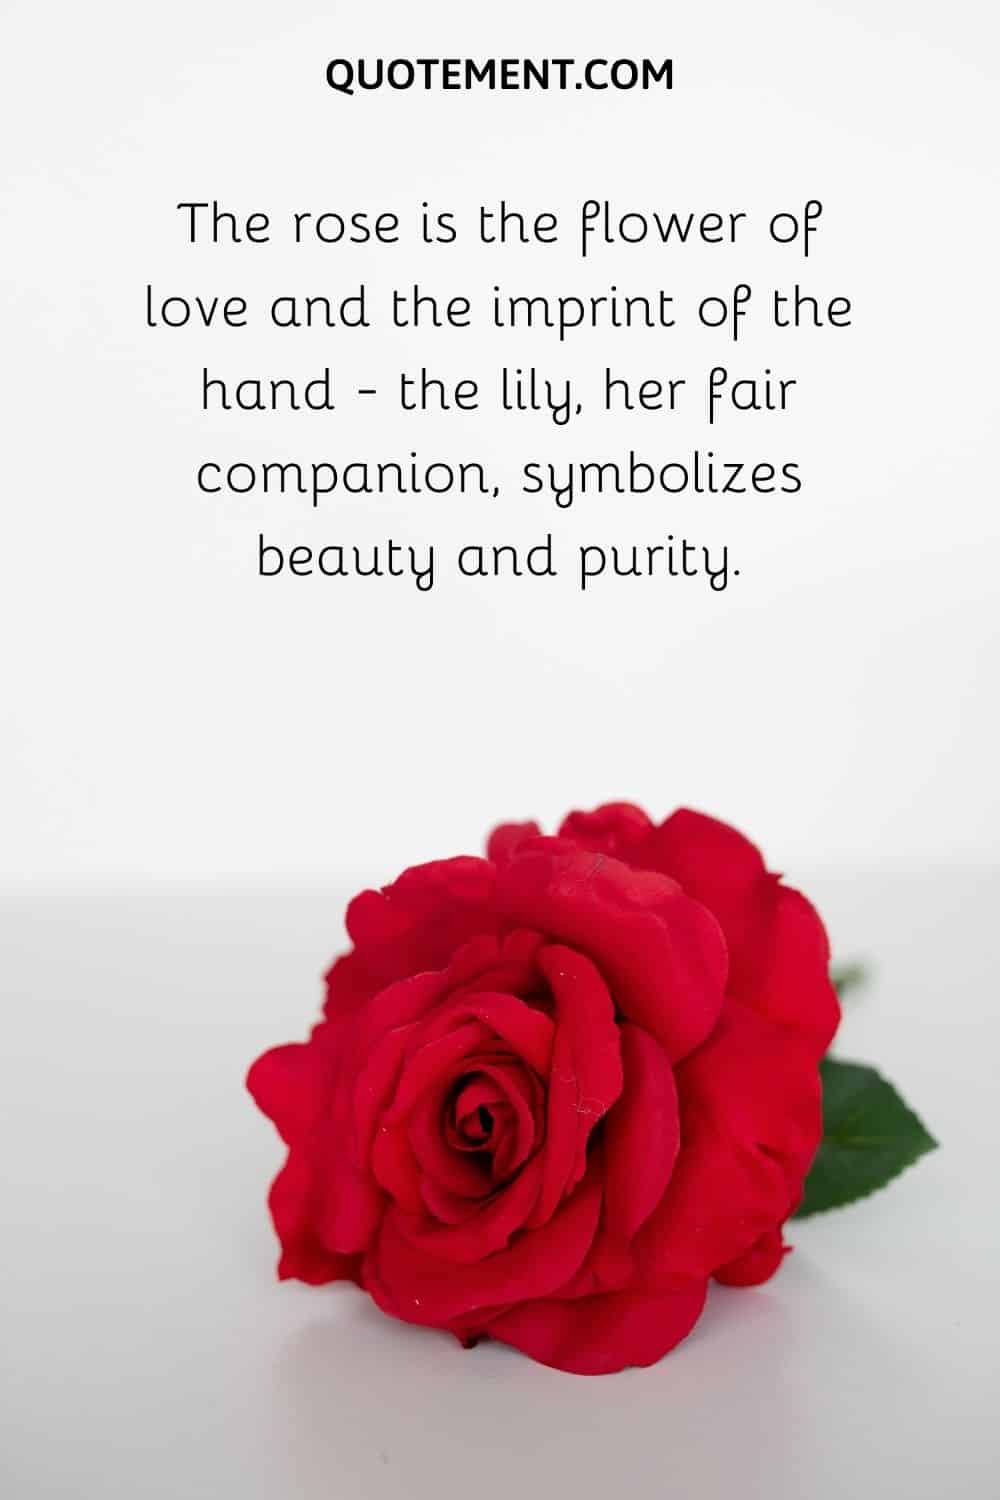 The rose is the flower of love and the imprint of the hand